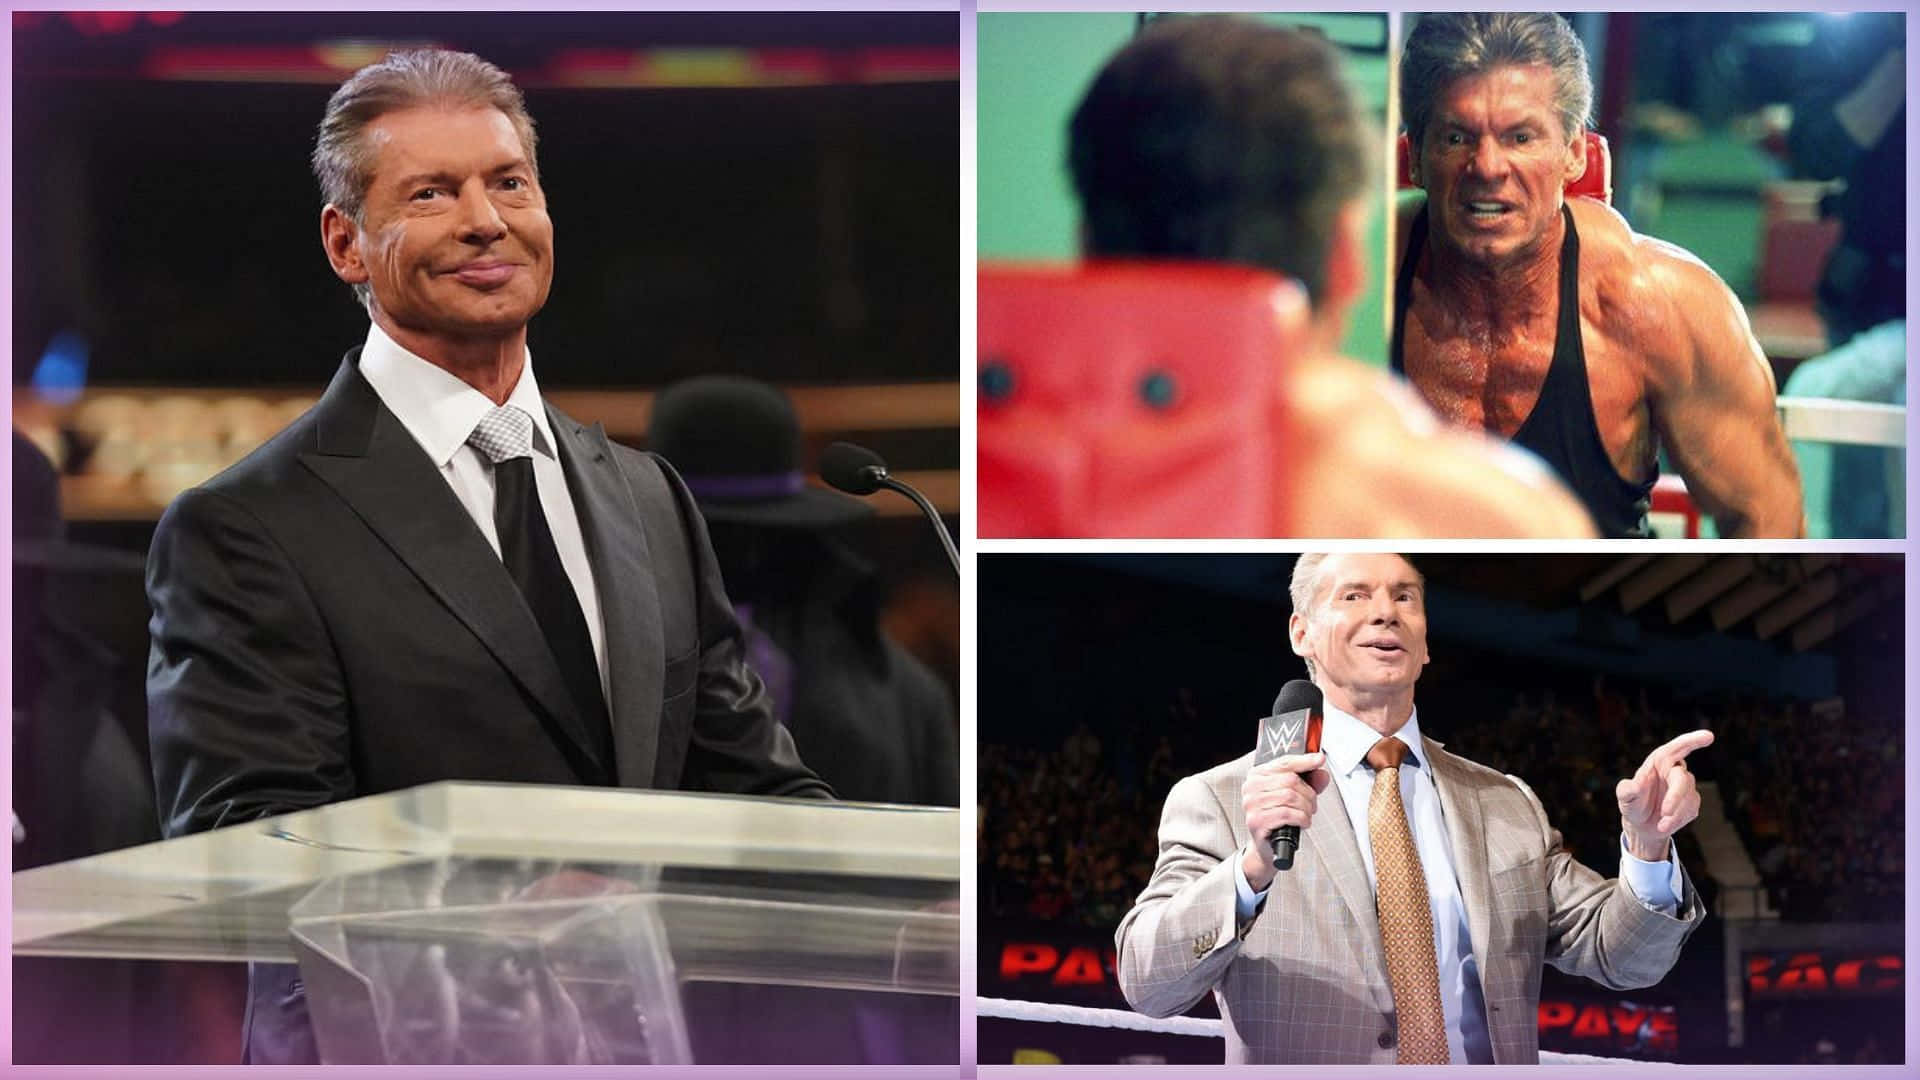 Wwe Vd Vince Mcmahon Collage Wallpaper